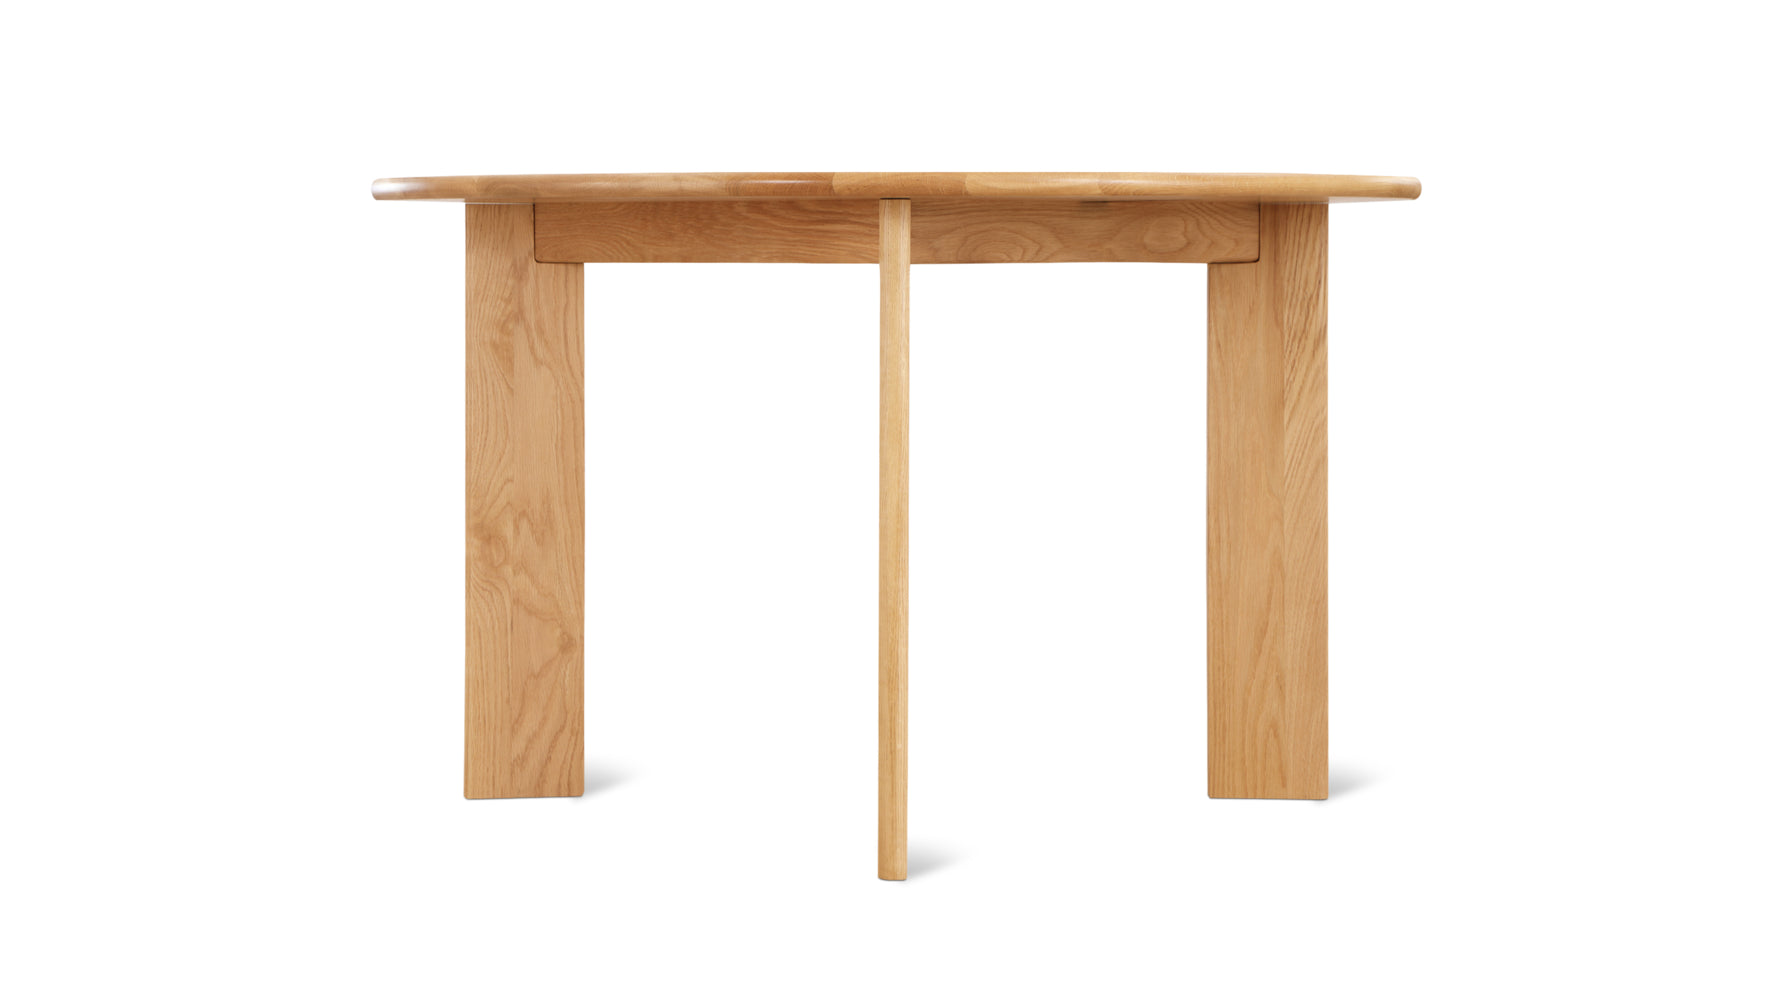 Frame Round Dining Table, Seats 4-5 People, Oak - Image 5